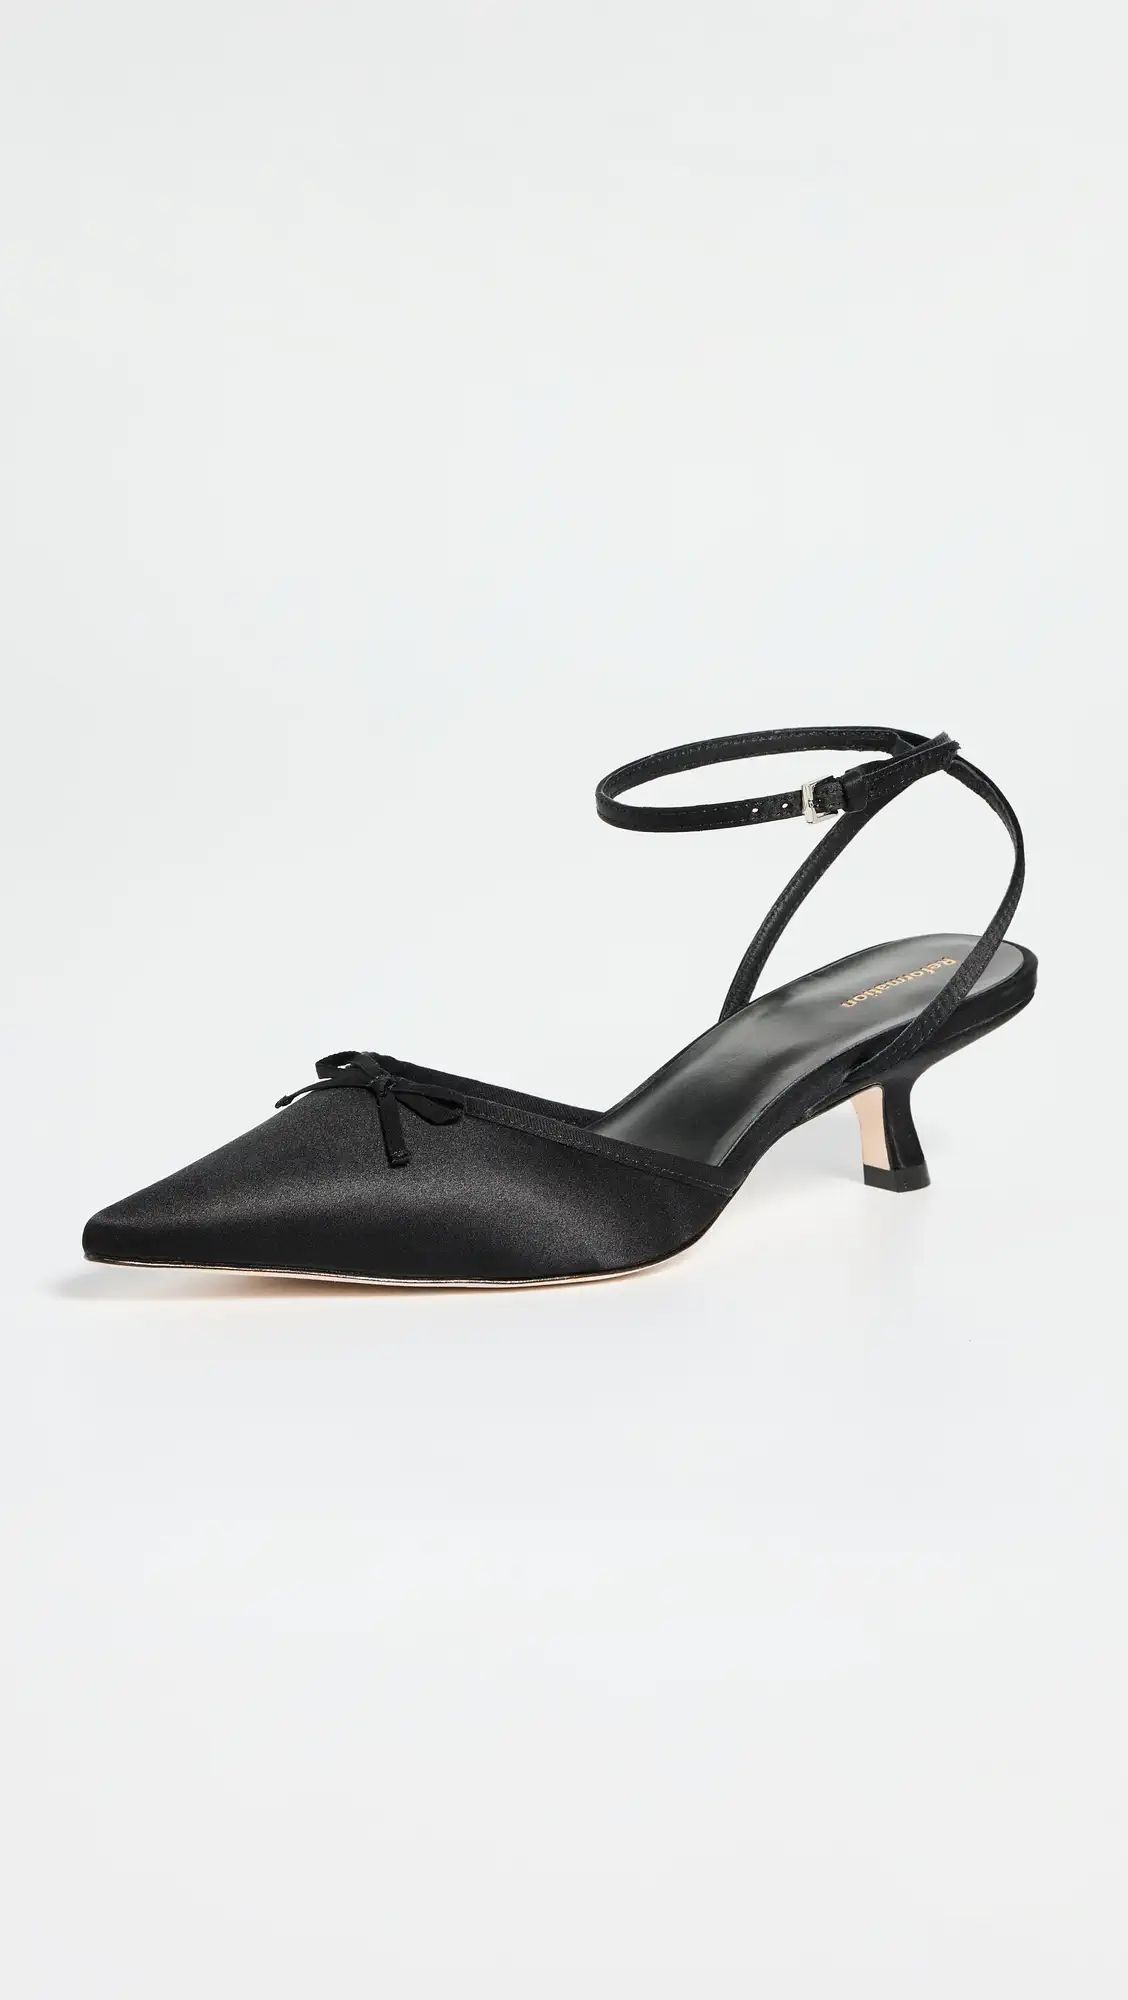 Reformation Wade Kitten Heel with Bow | Shopbop | Shopbop